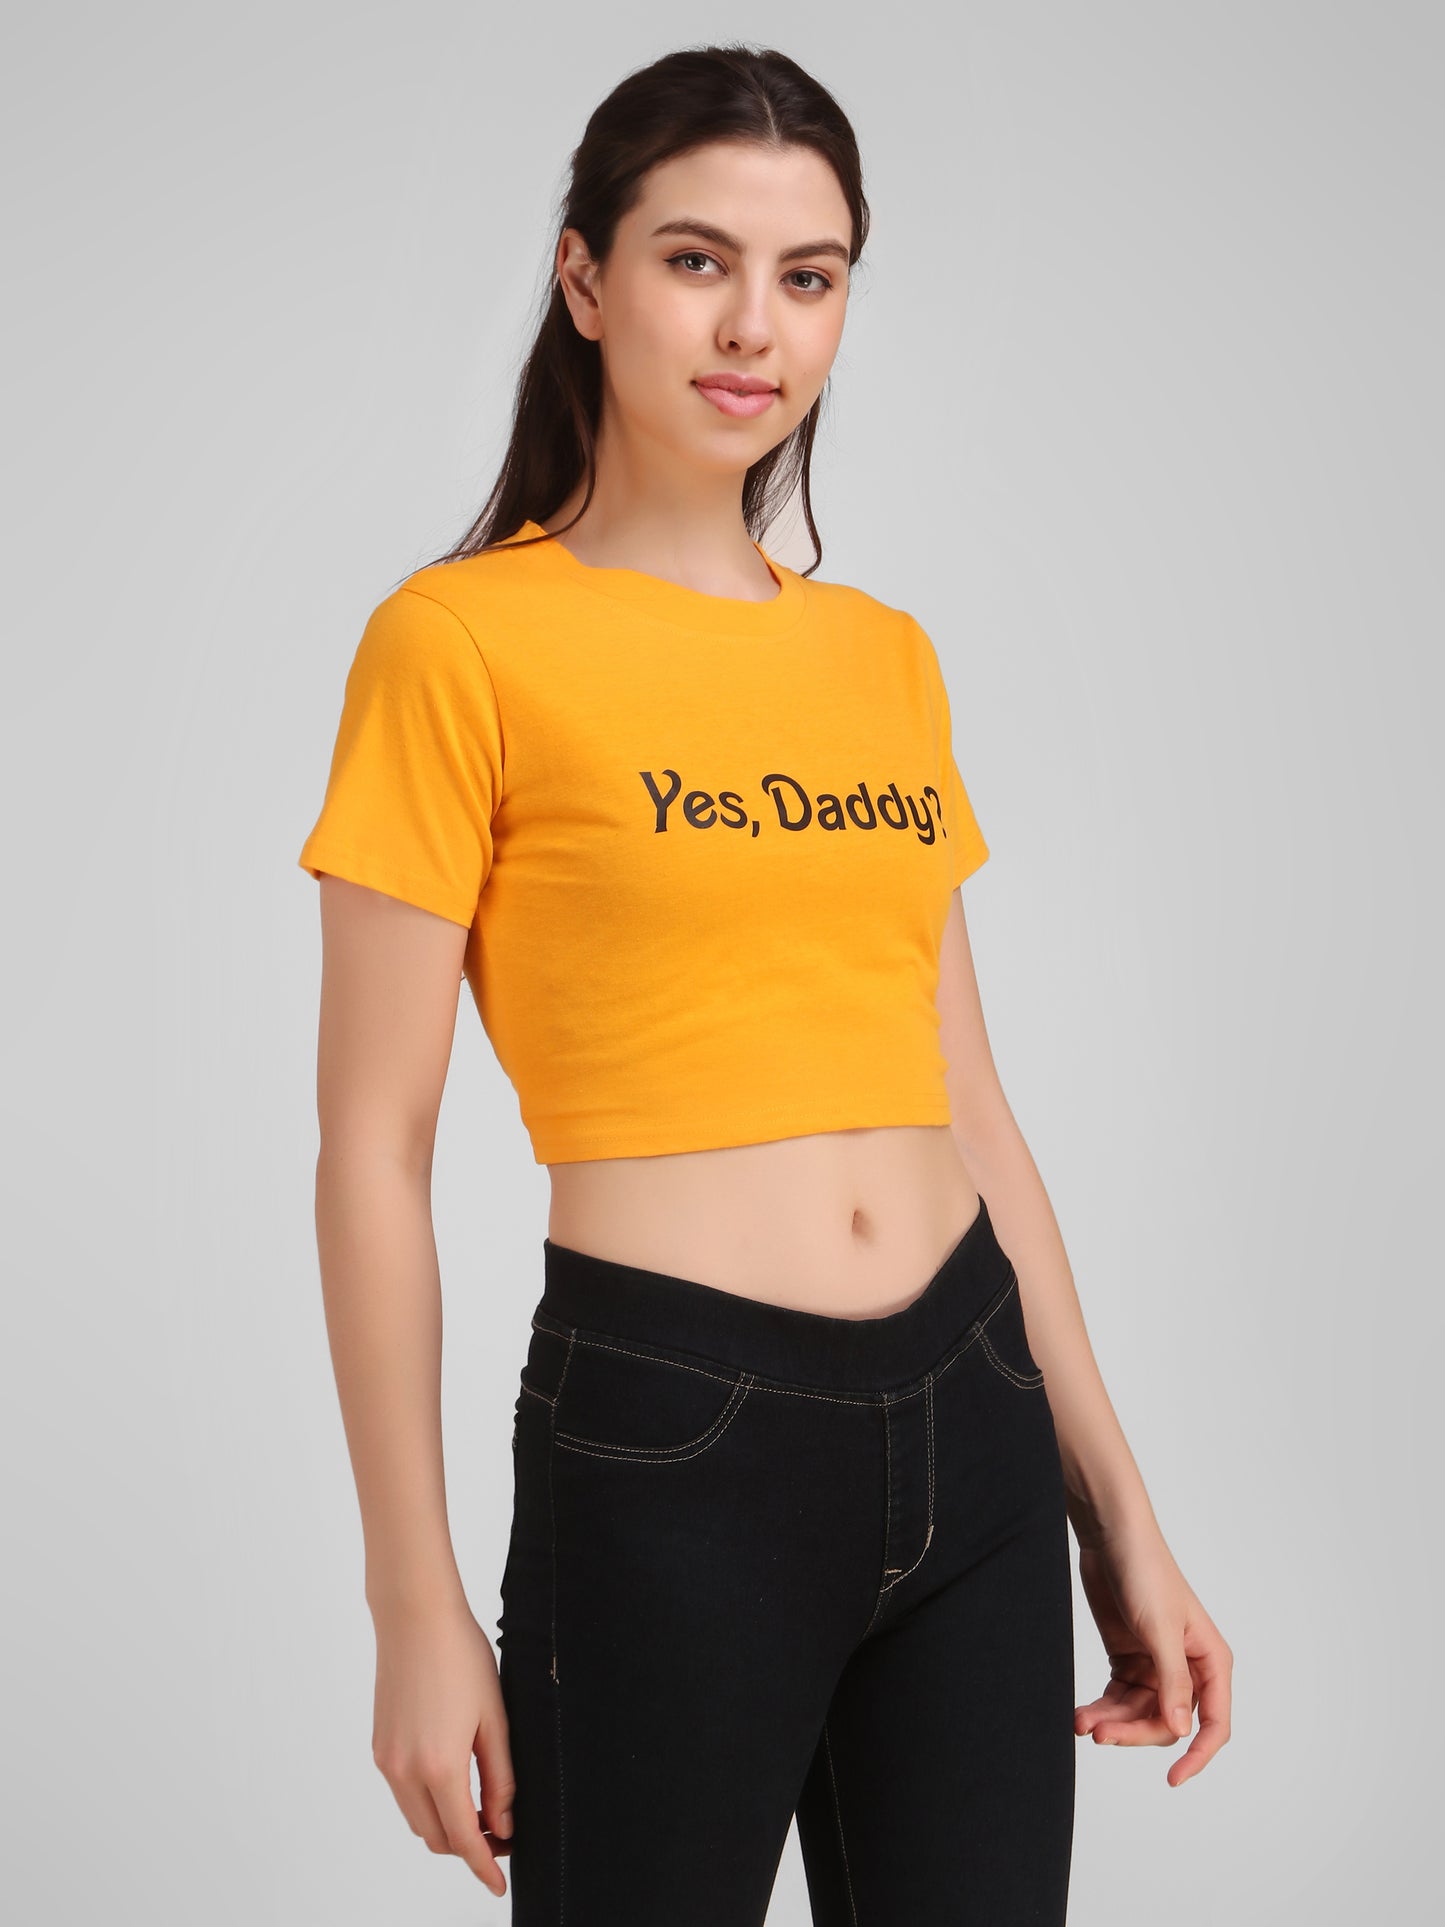 White Dog & Mustard Yes Daddy Print Combo(2 Tops) Crop Tops!!